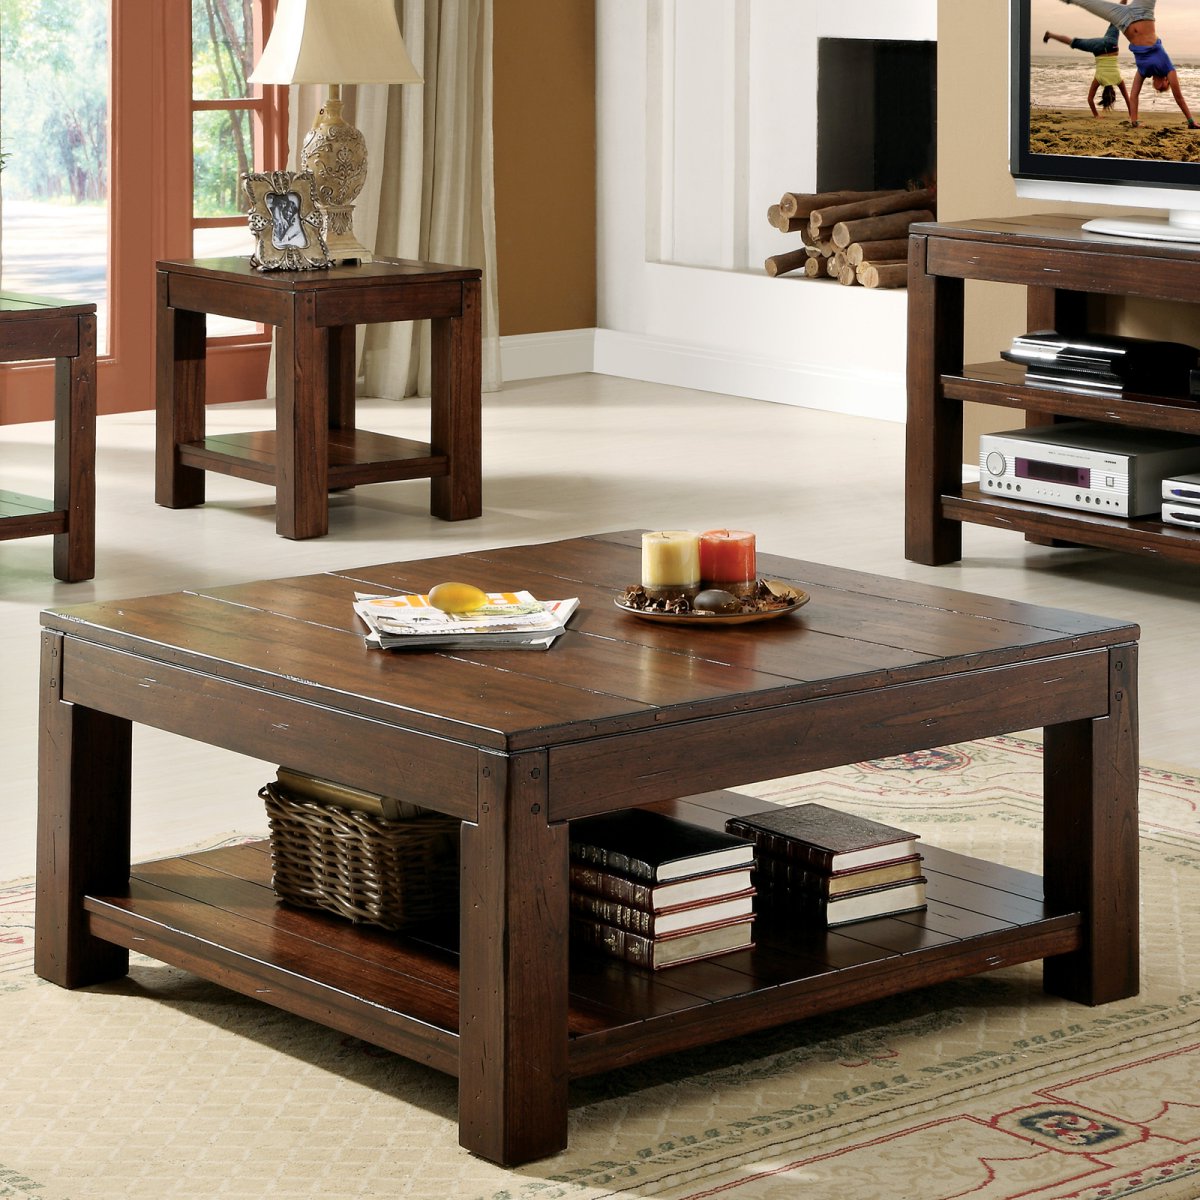 Awesome Large Square Dark Wood Coffee Table With Storages 